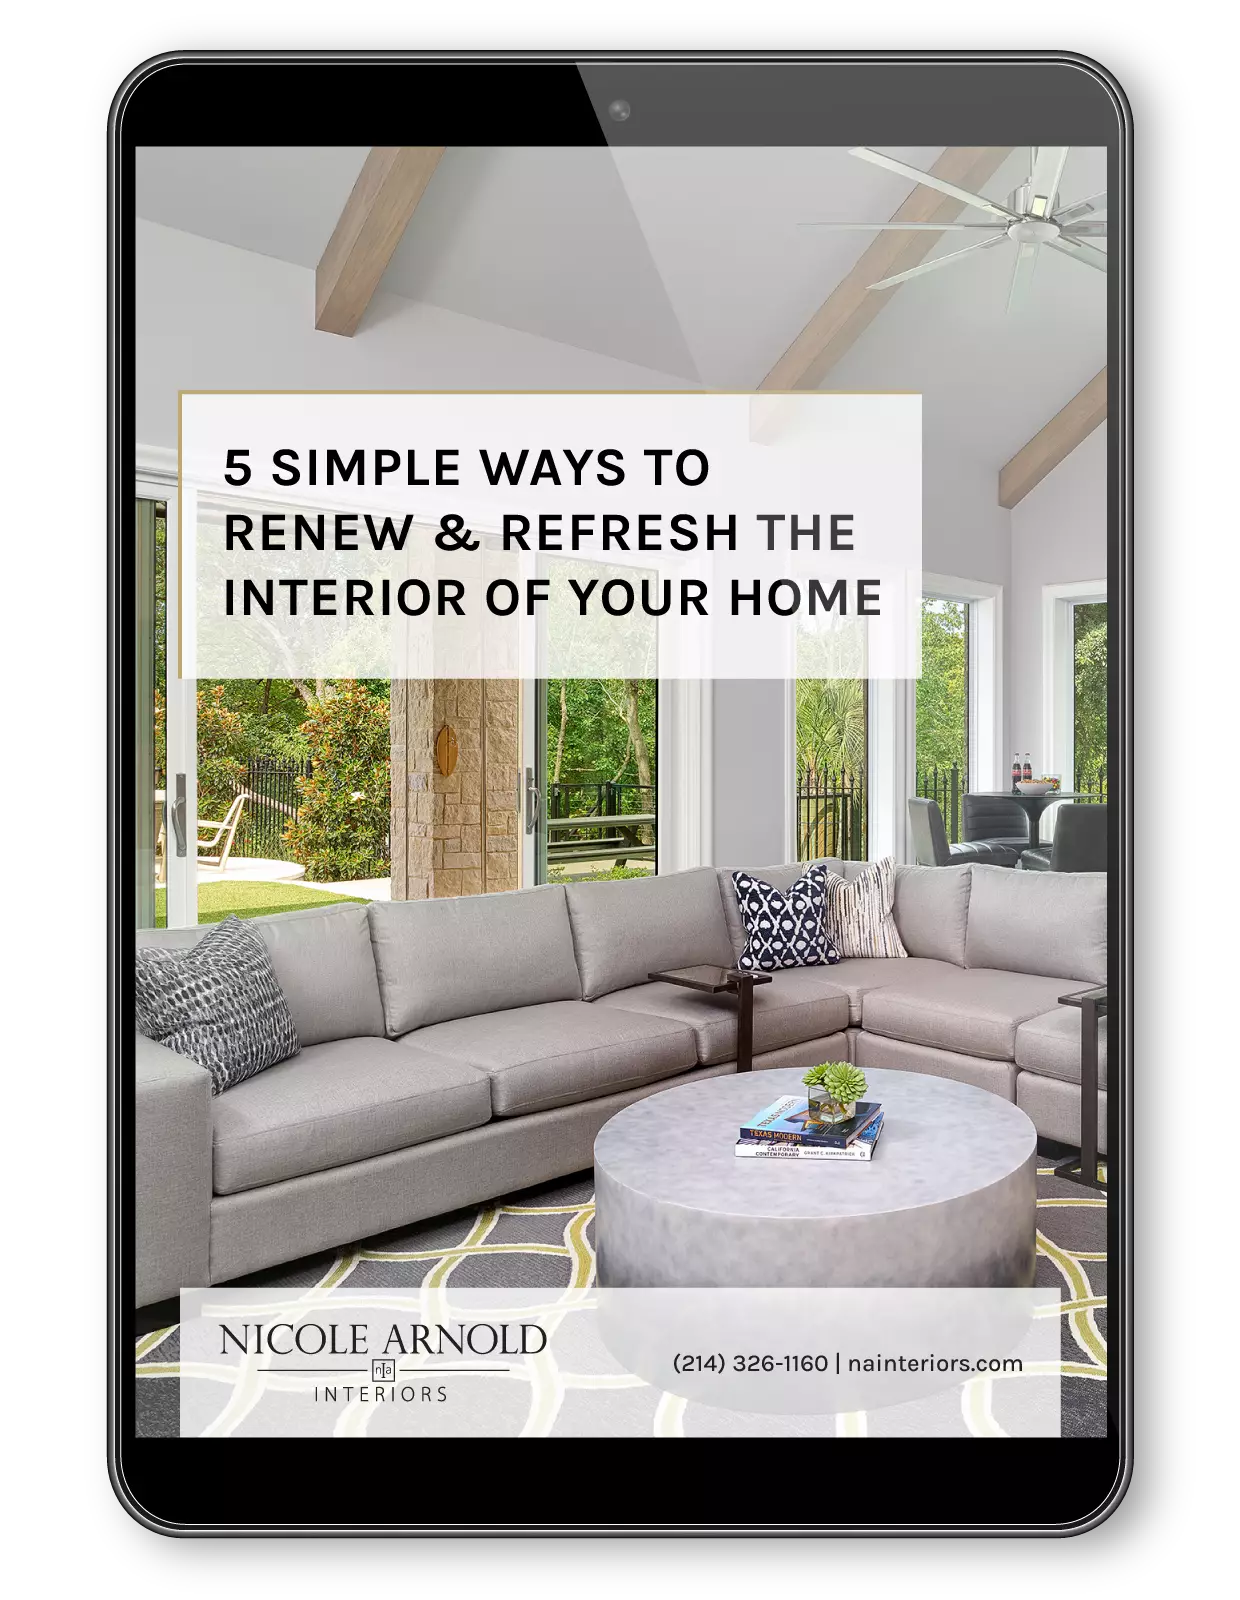 5 Simple Ways to Renew and Refresh the Interior of Your Home